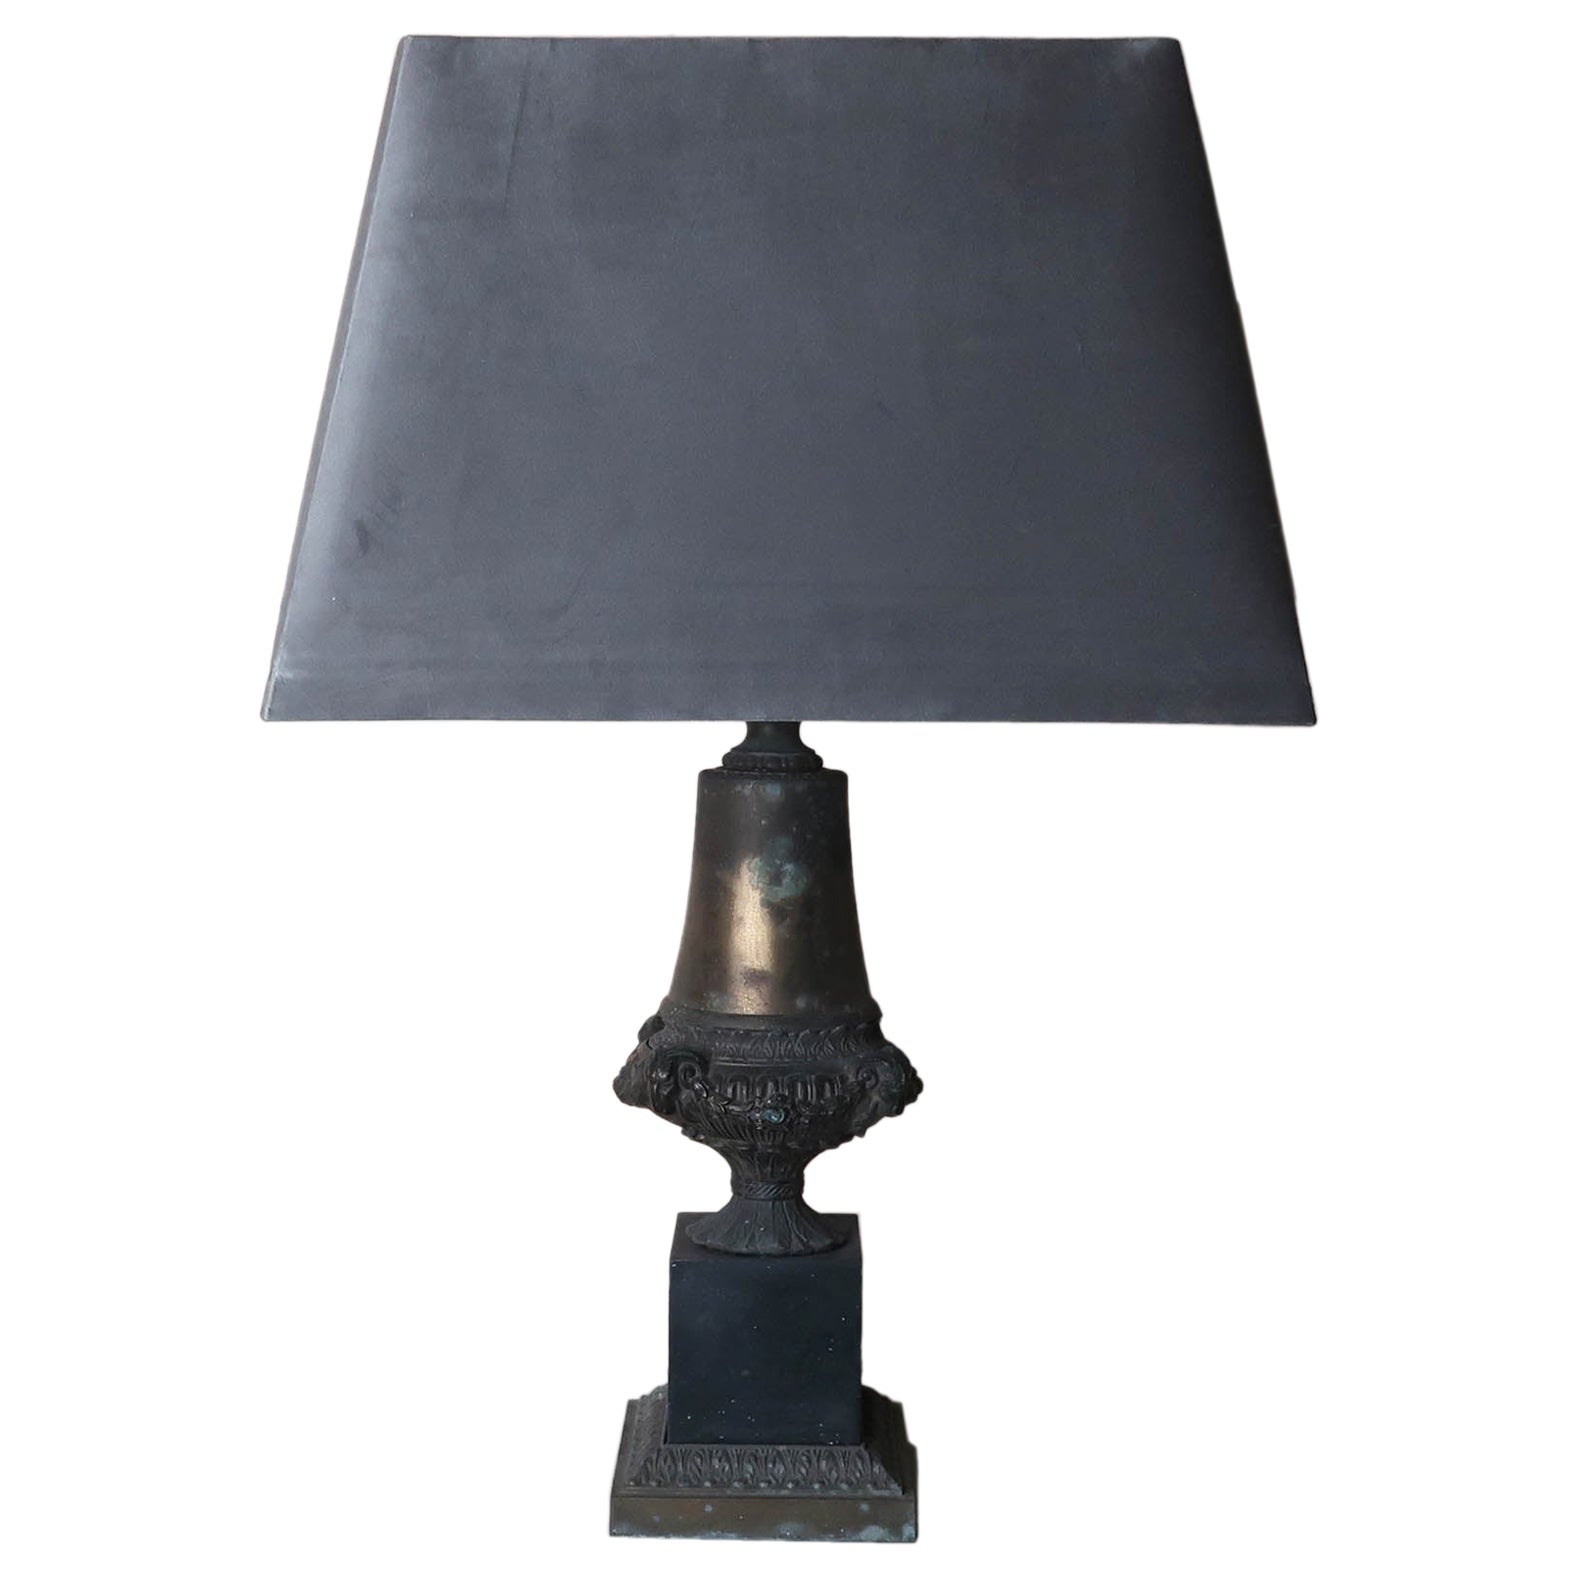 Antique Spelter Table Lamp In Empire Style. French C.1920